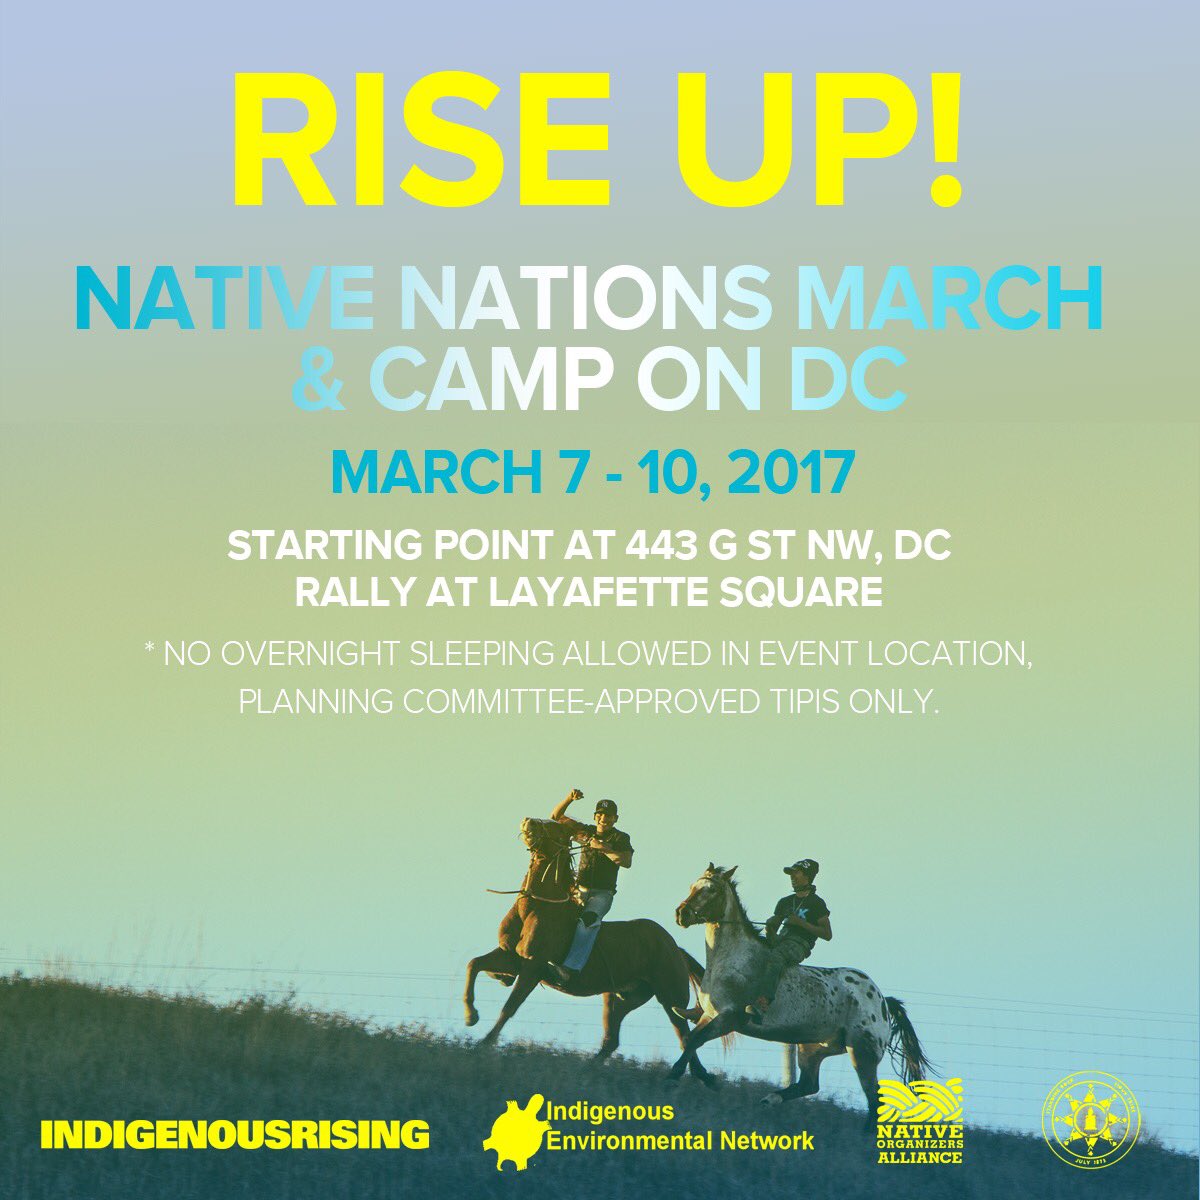 Native American protests, Dakota Access Pipeline, Standing Rock Sioux tribe, Dallas Goldtooth, Energy Transfer Partners, American Indian treaty rights, American Indian treaty violations, Donald Trump